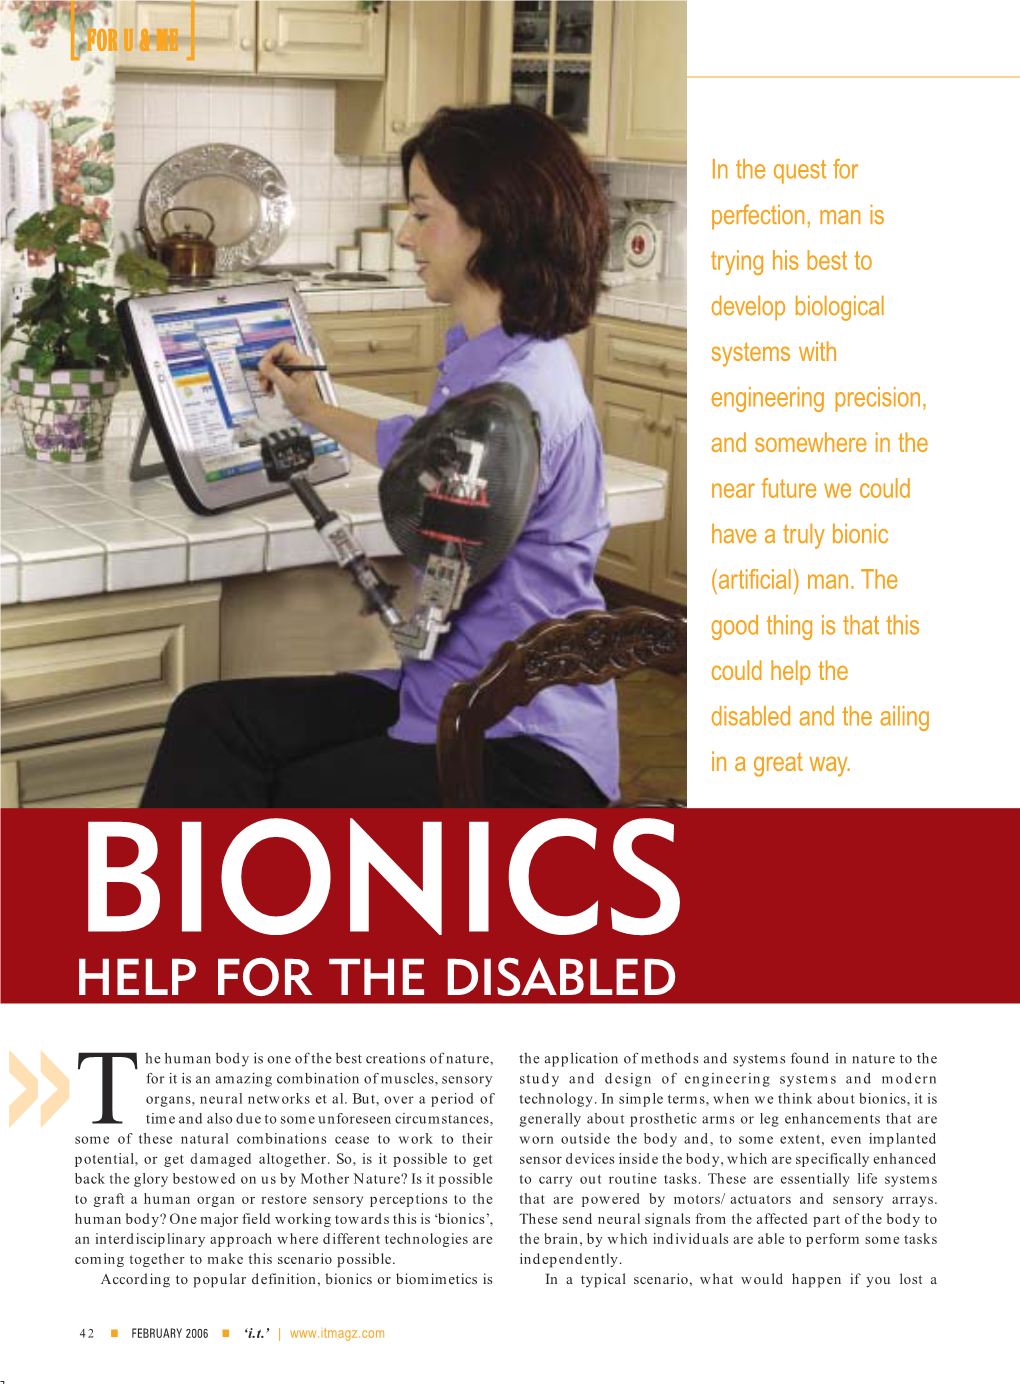 Bionics Help for the Disabled